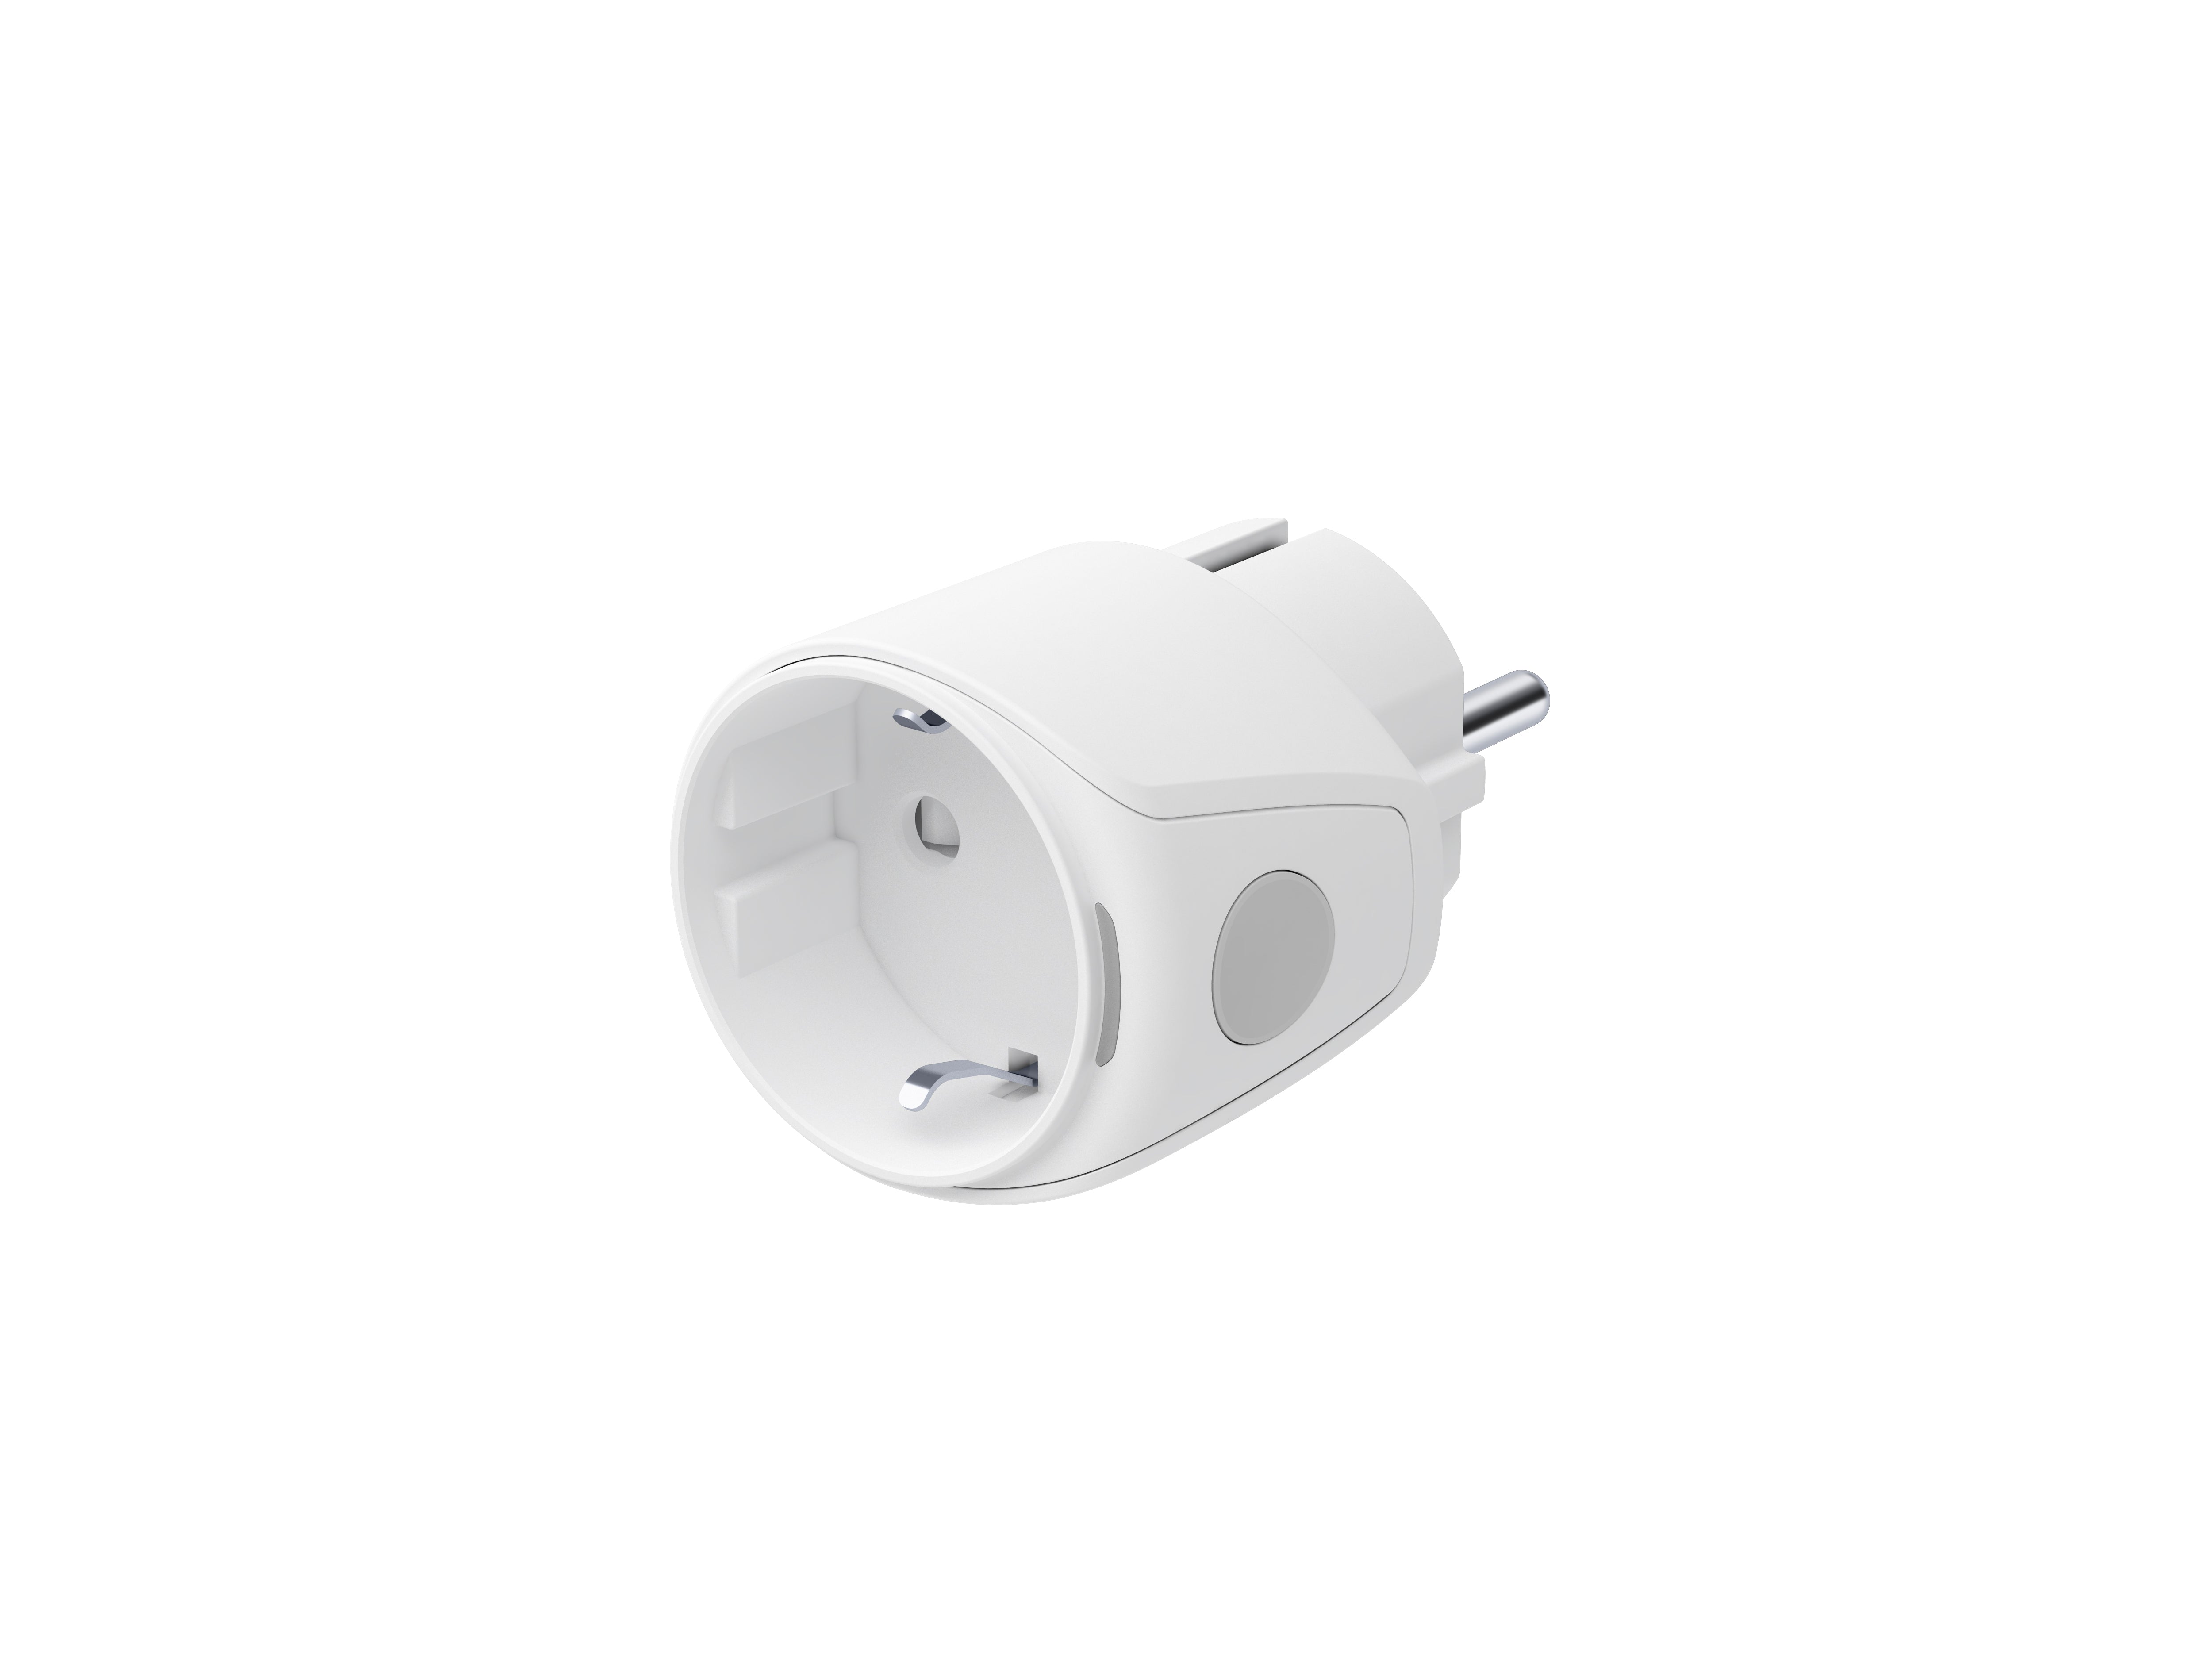 Aeotec Smart Outlet Type F WLAN